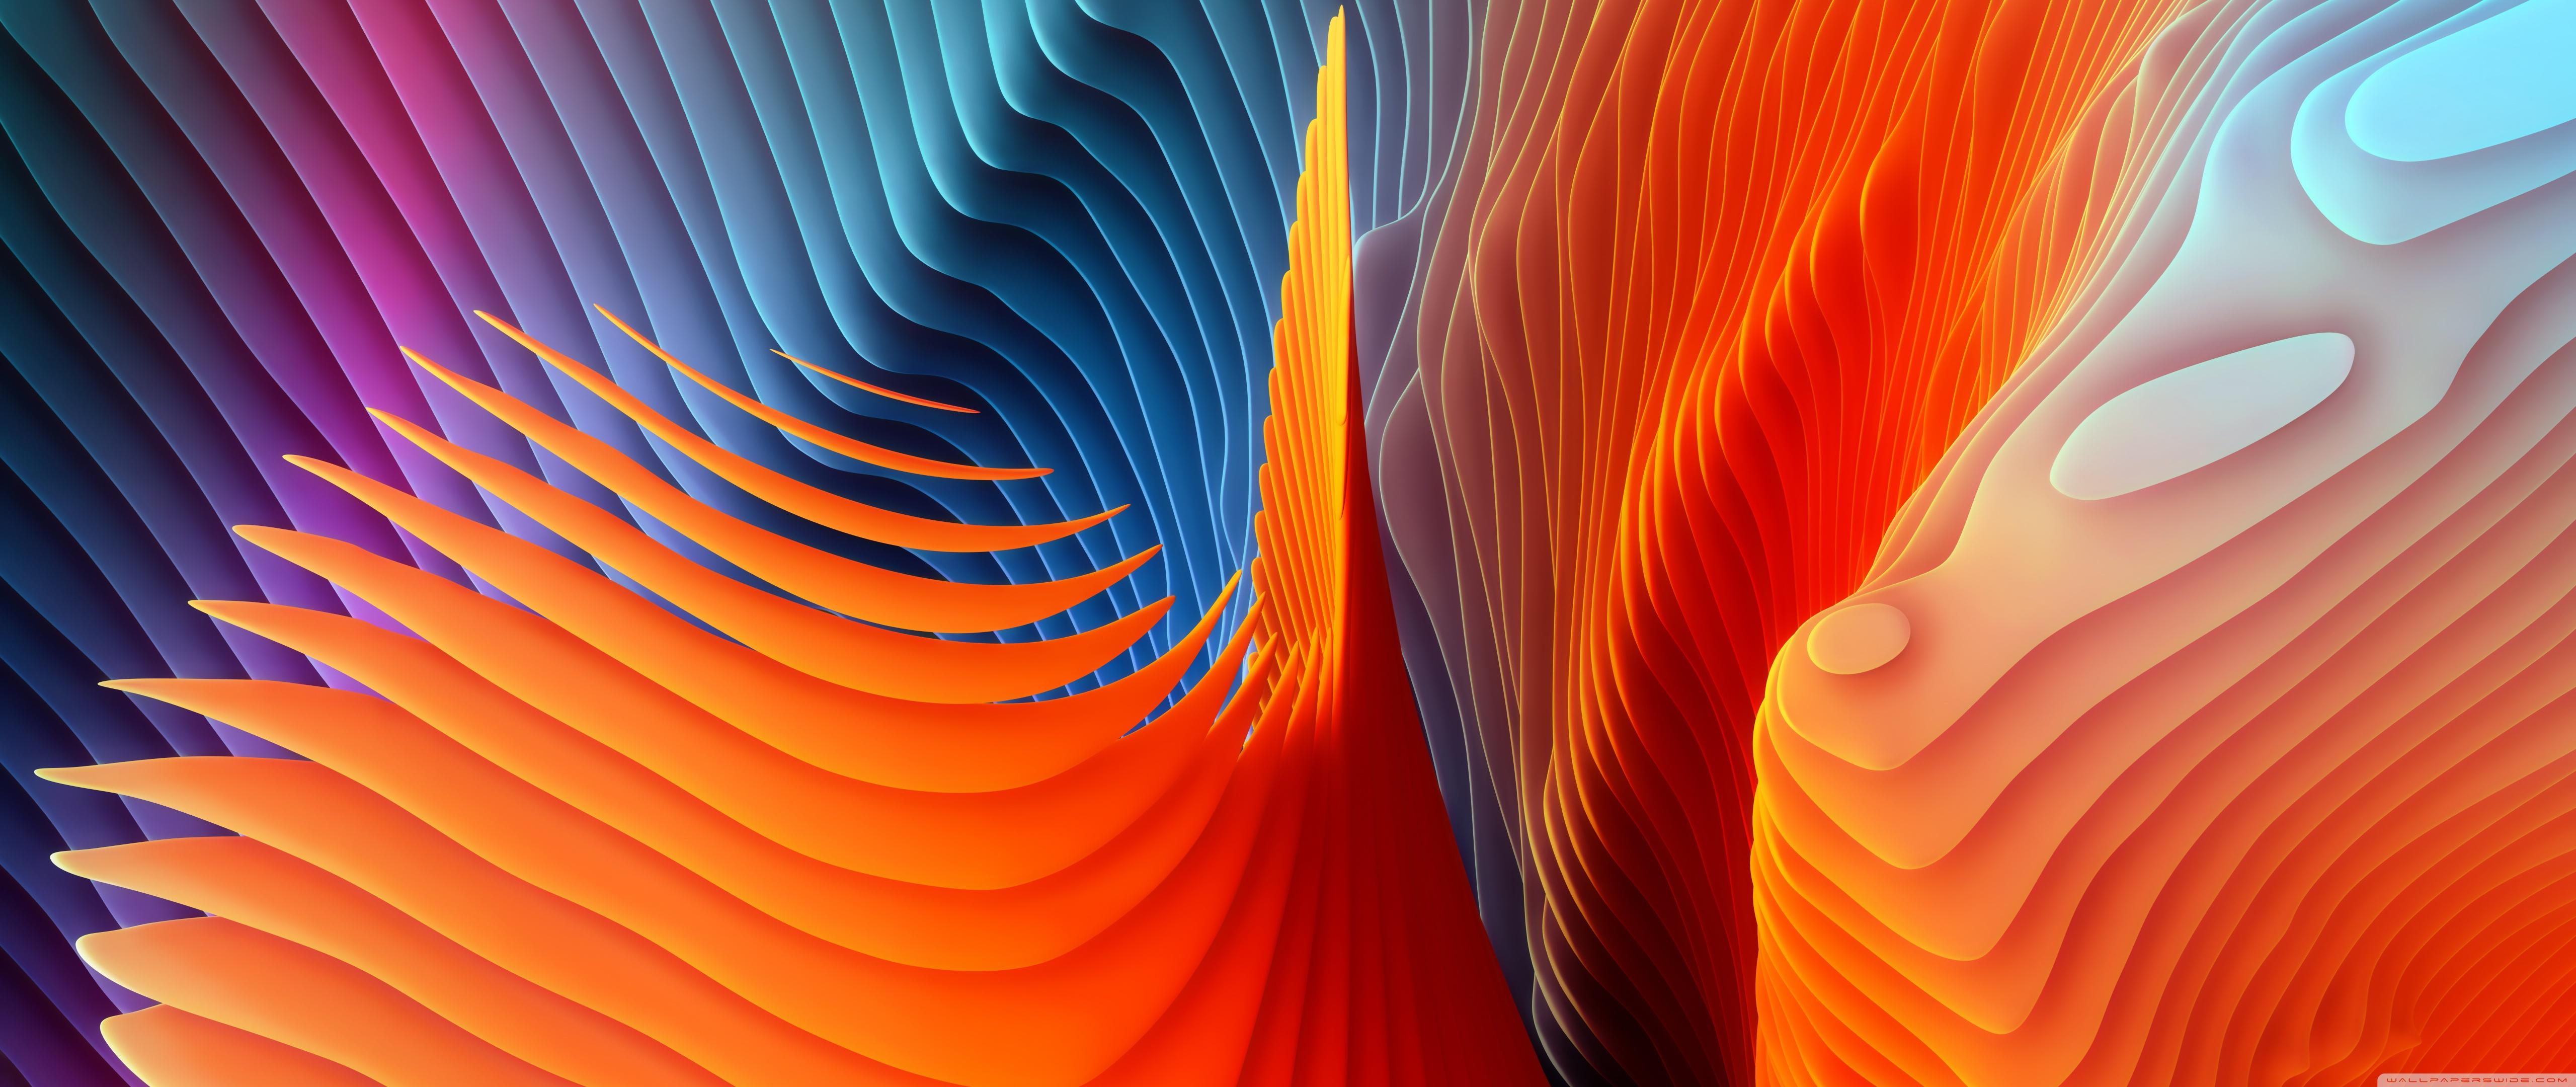 5120 x 2160 · jpeg - Colorful Abstract Waves 4K Wallpapers - Wallpaper Cave